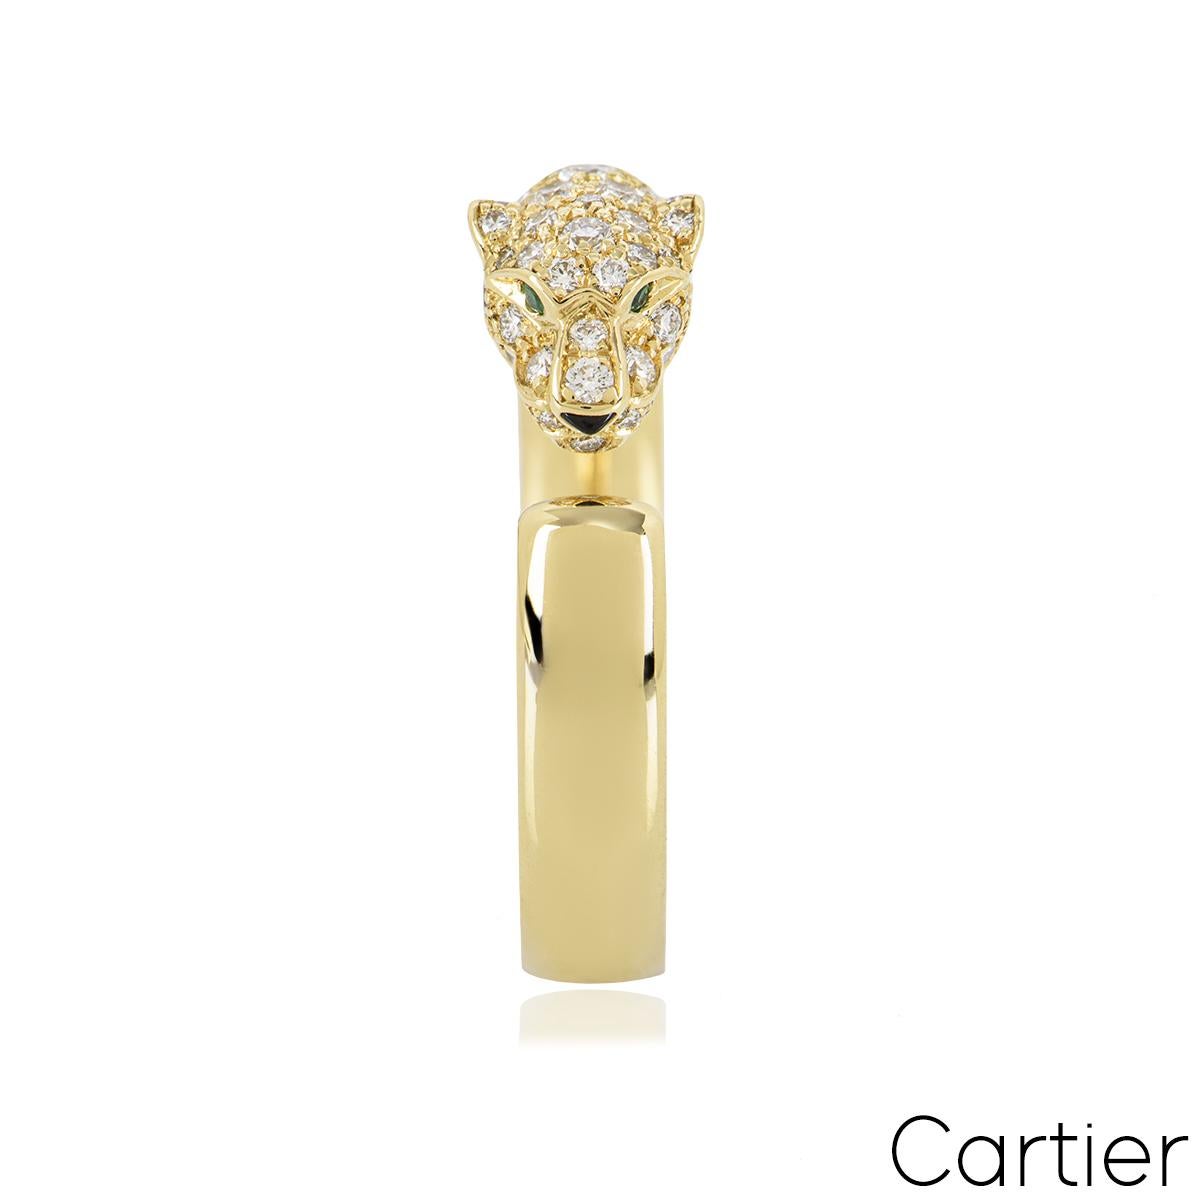 A striking 18k yellow gold ring by Cartier from the Panthere de Cartier collection. The ring features a panther motif pave set with 72 round brilliant cut diamonds totalling 0.68ct. The panther motif is further complemented with 2 round emeralds as